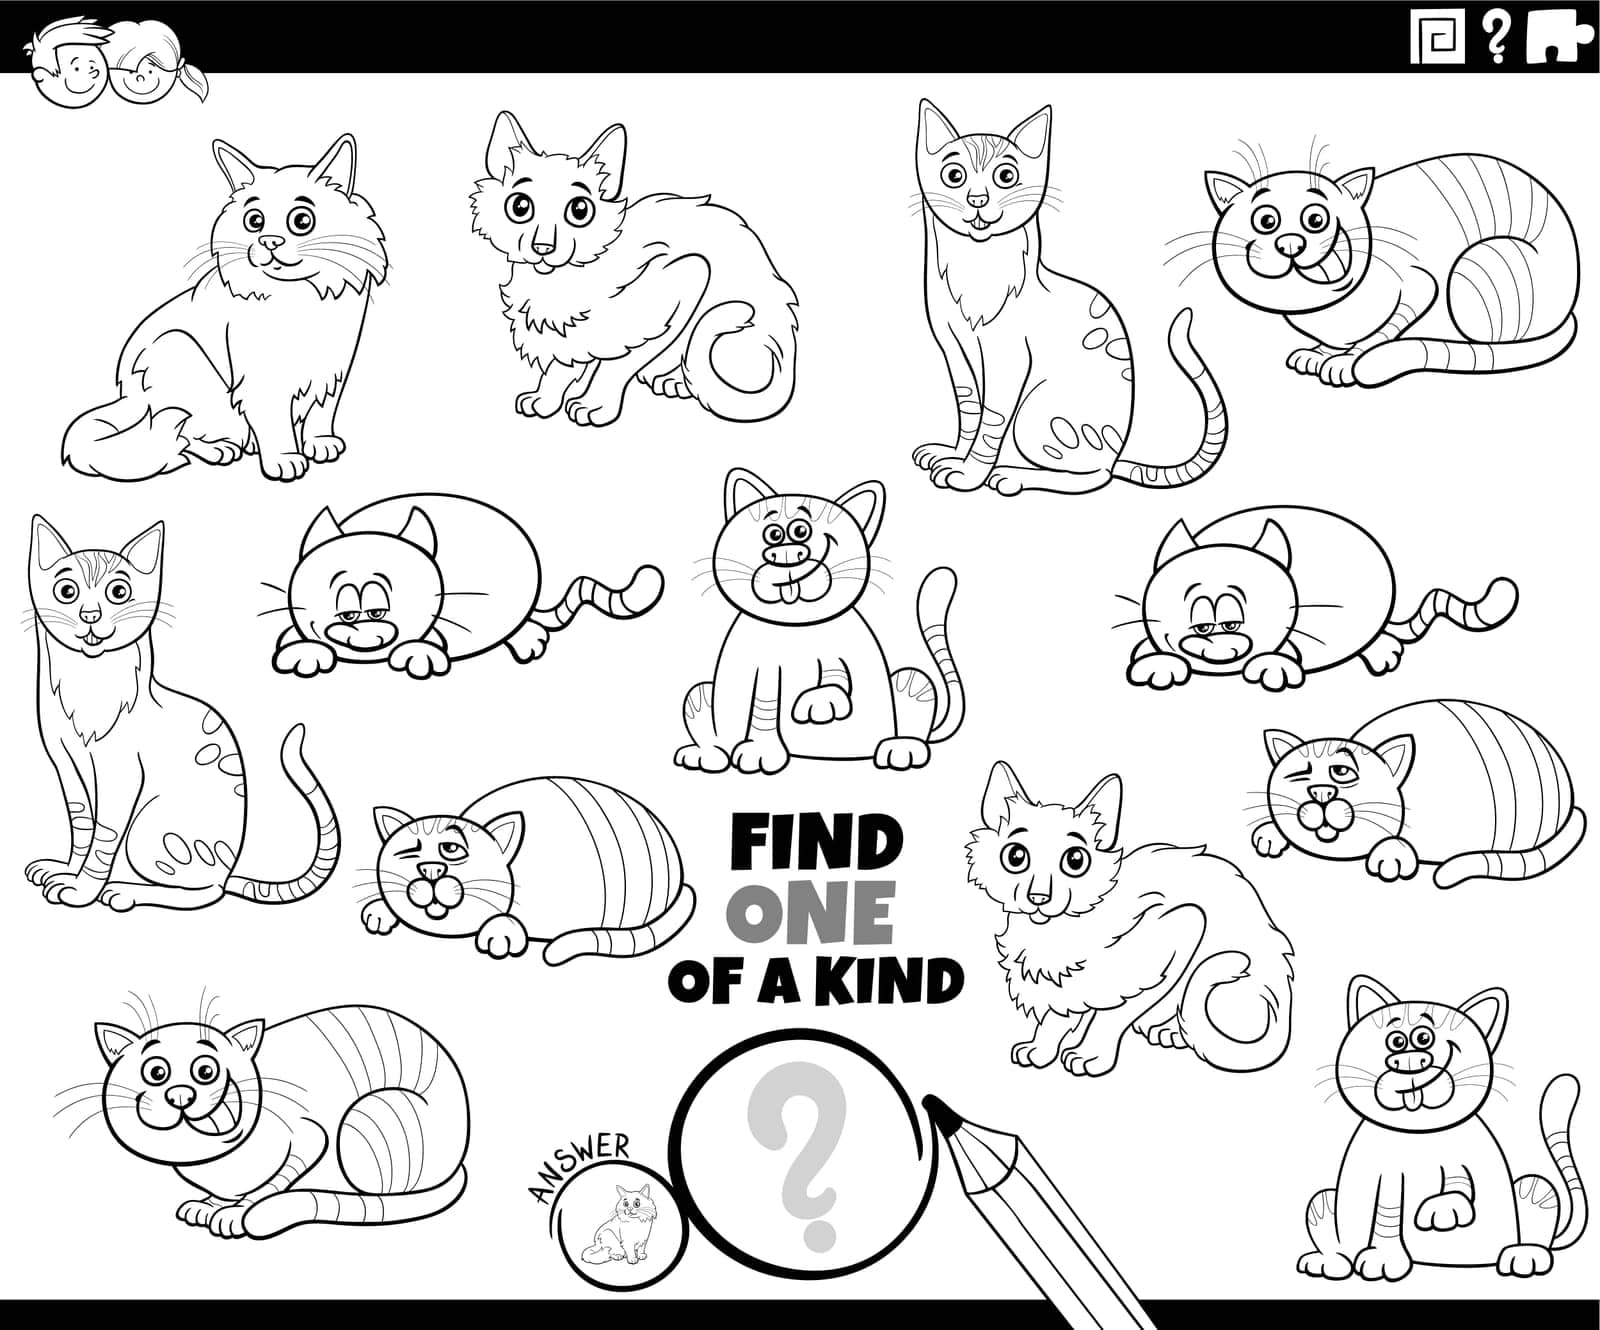 one of a kind game with comic cats coloring page by izakowski